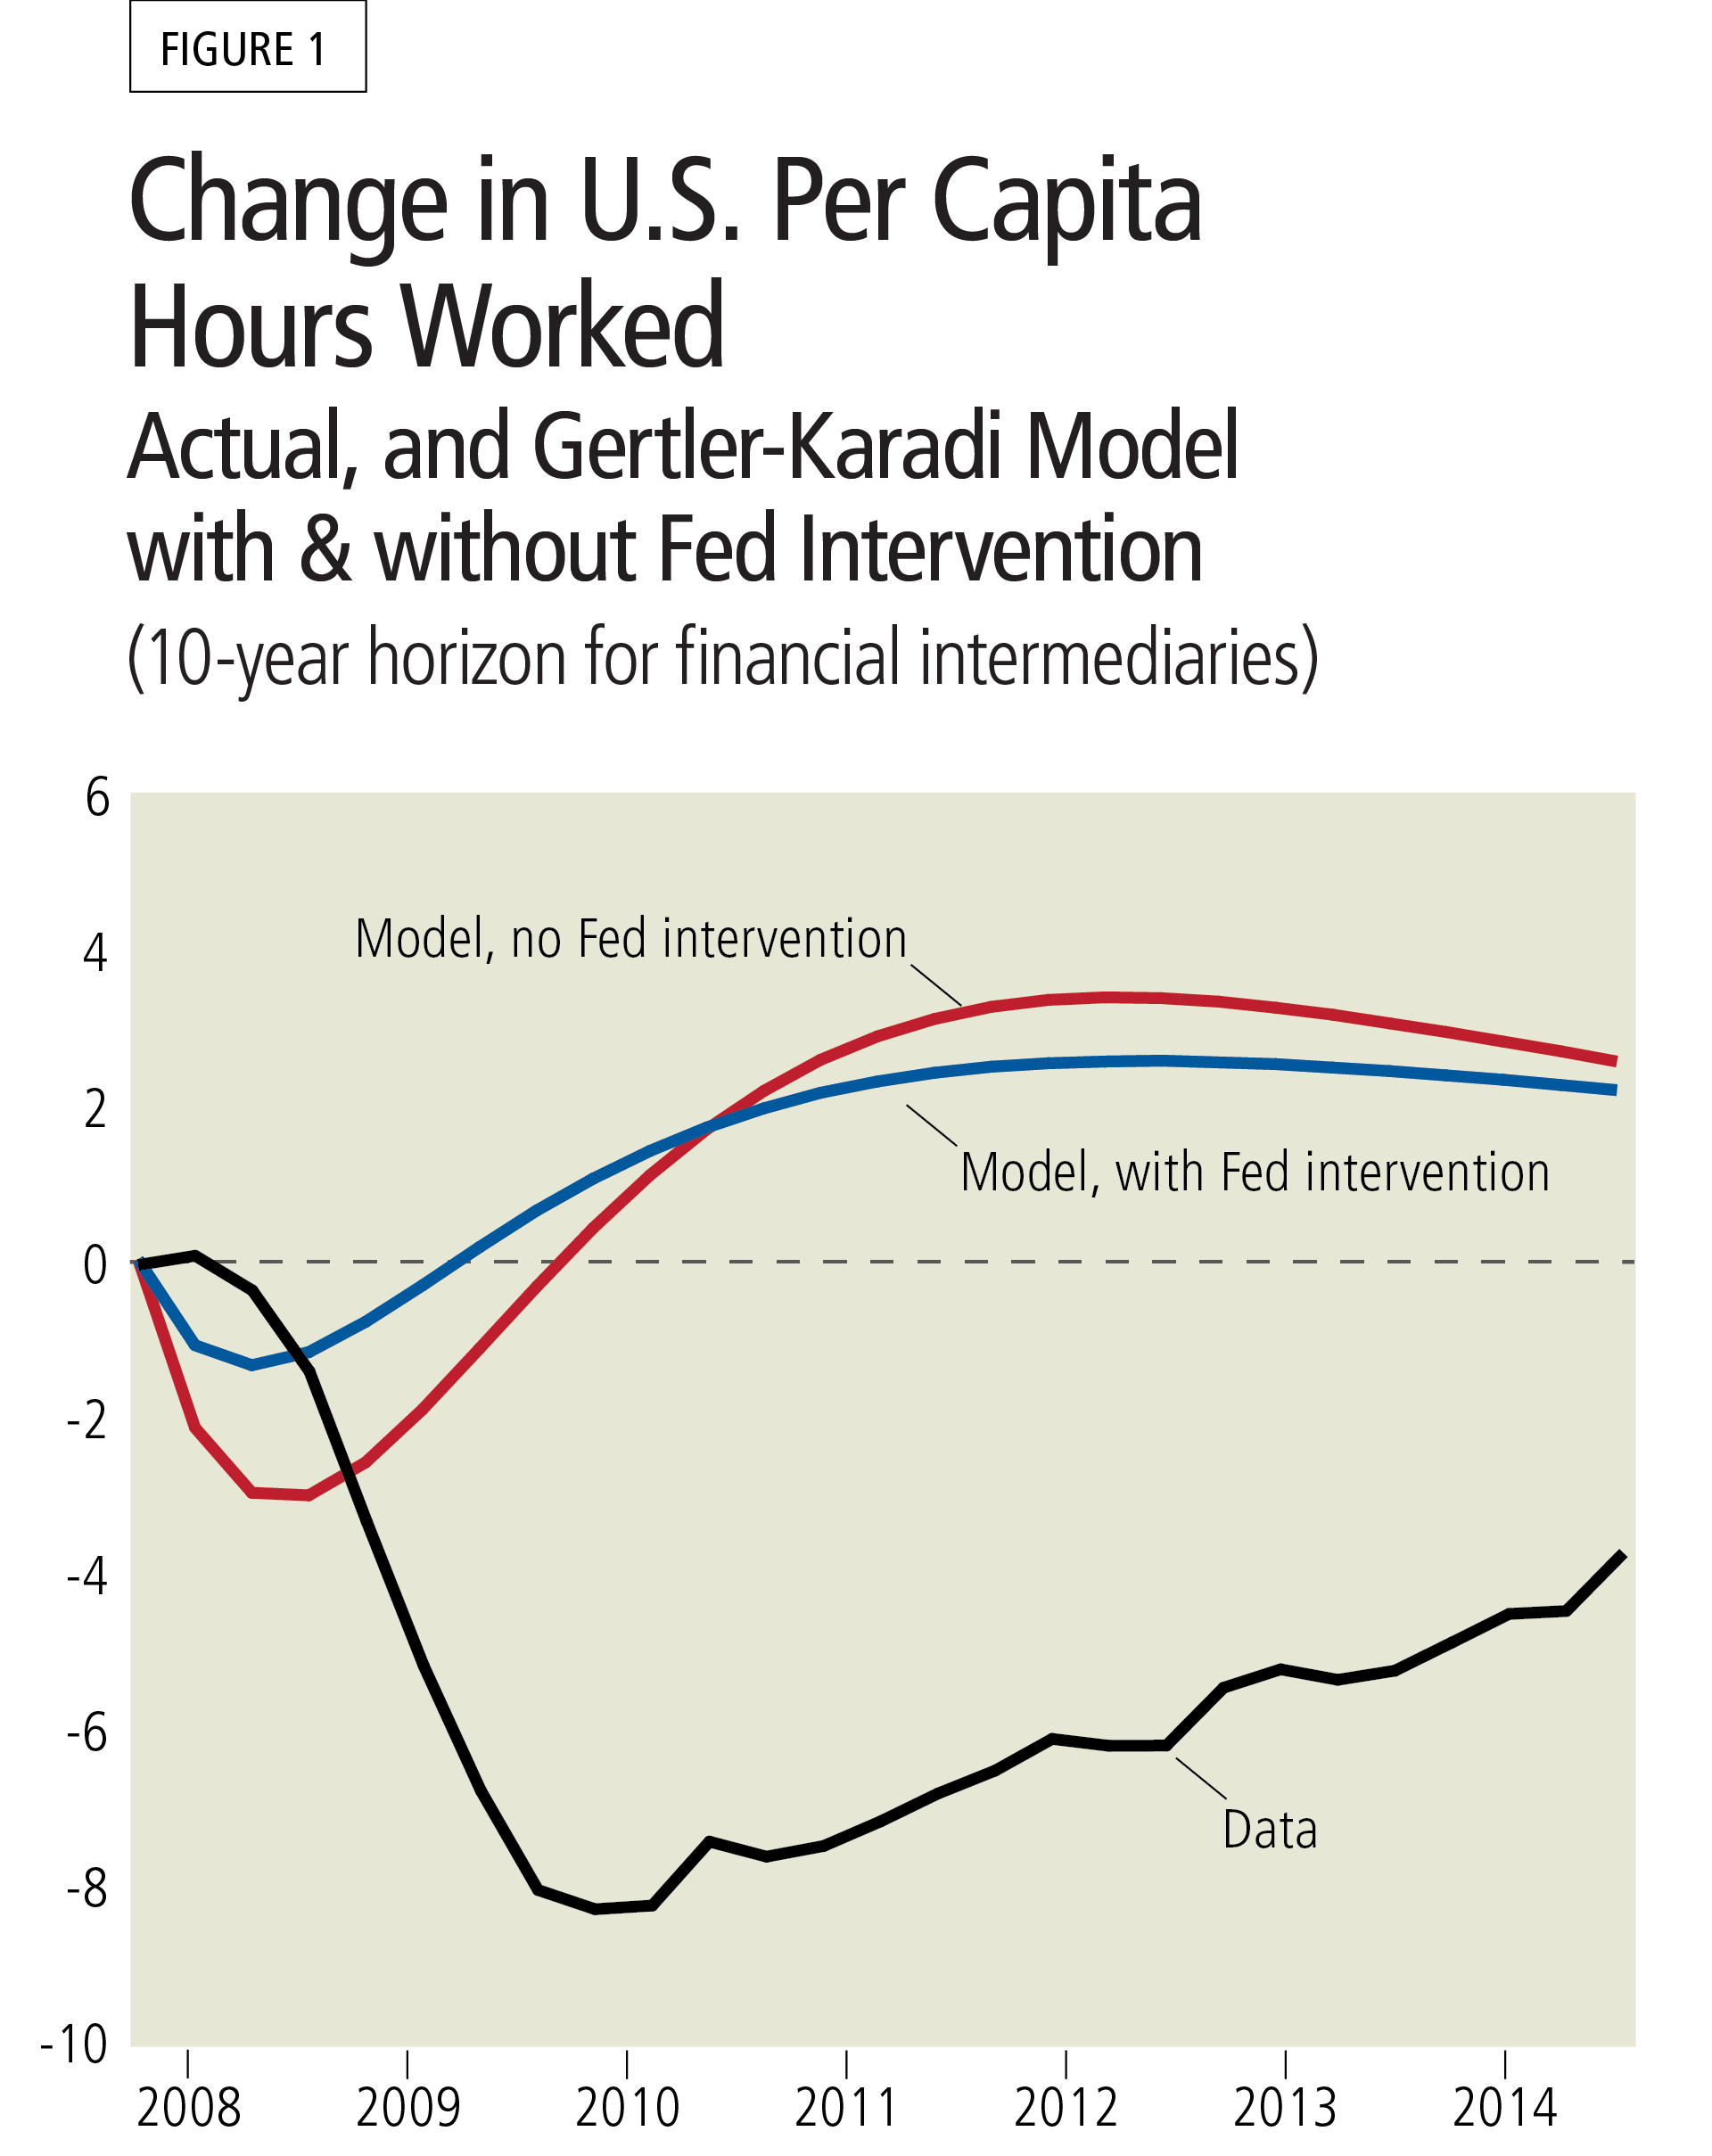 Figure 1: Change in U.S. Per Capita Hours Worked - Actual, and Gertler-Karadi Model with and without Fed Intervention (10-year horizon for financial intermediaries)